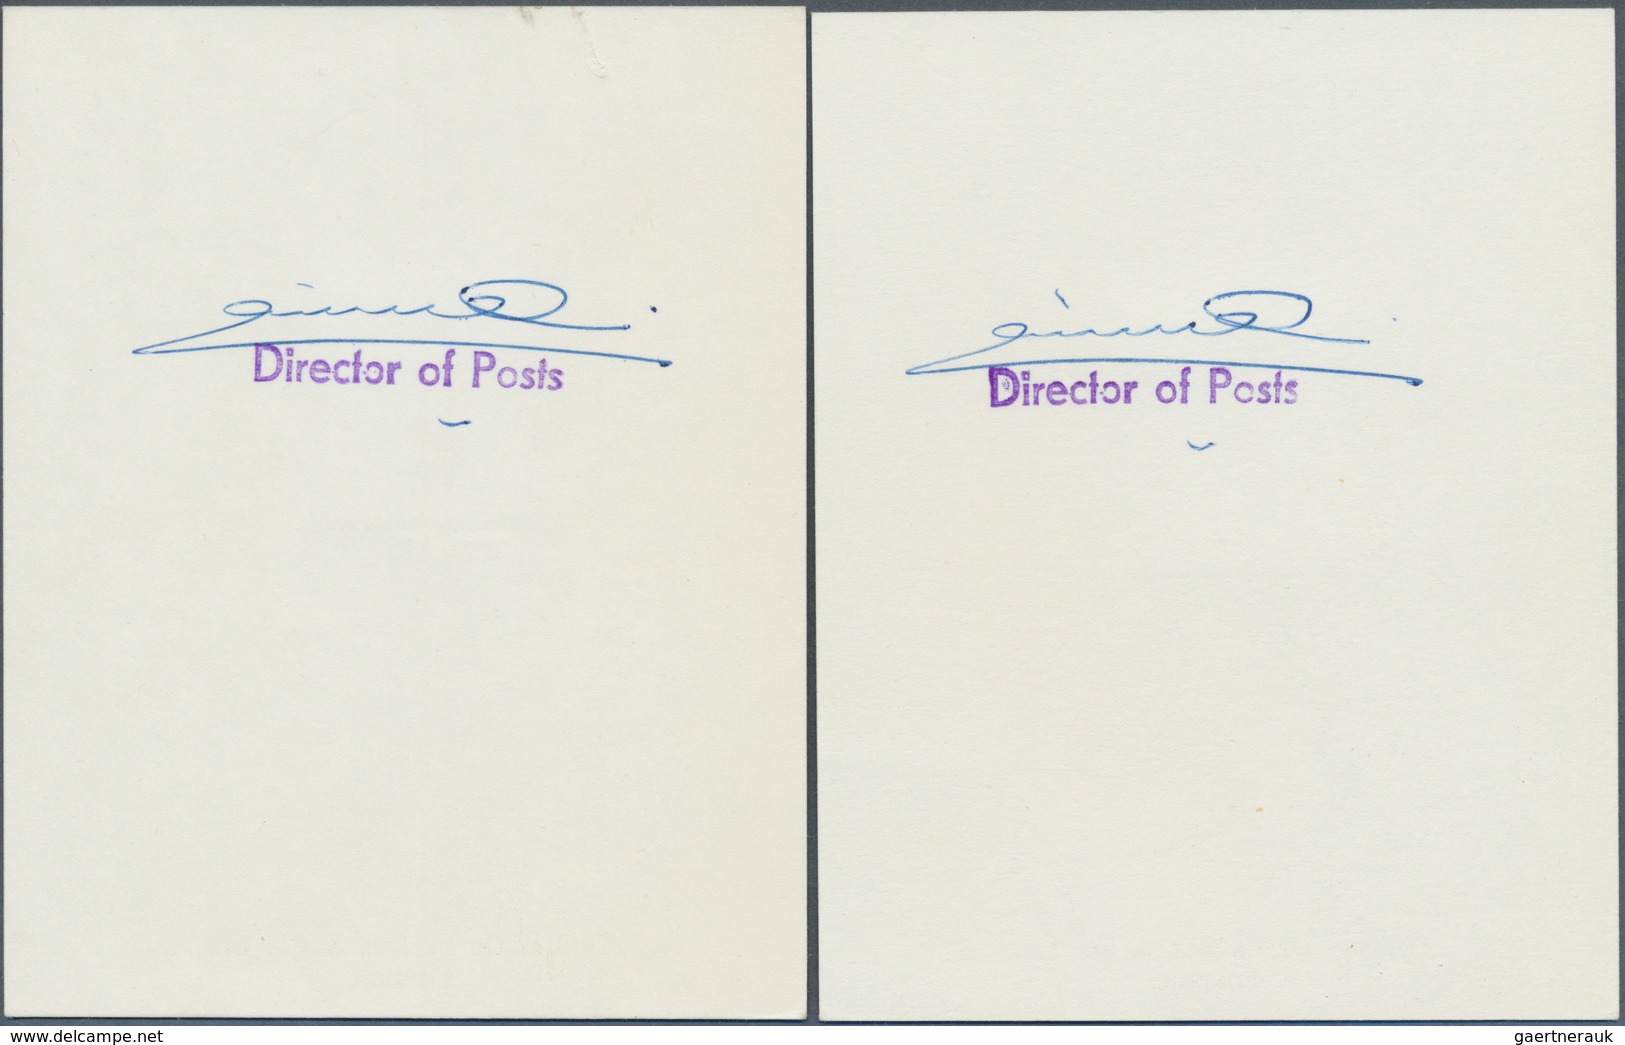 Kuwait: 1969, Amir Sheikh Sabah issue 8f-90f. Imperforate final proofs, as submitted and approved, o